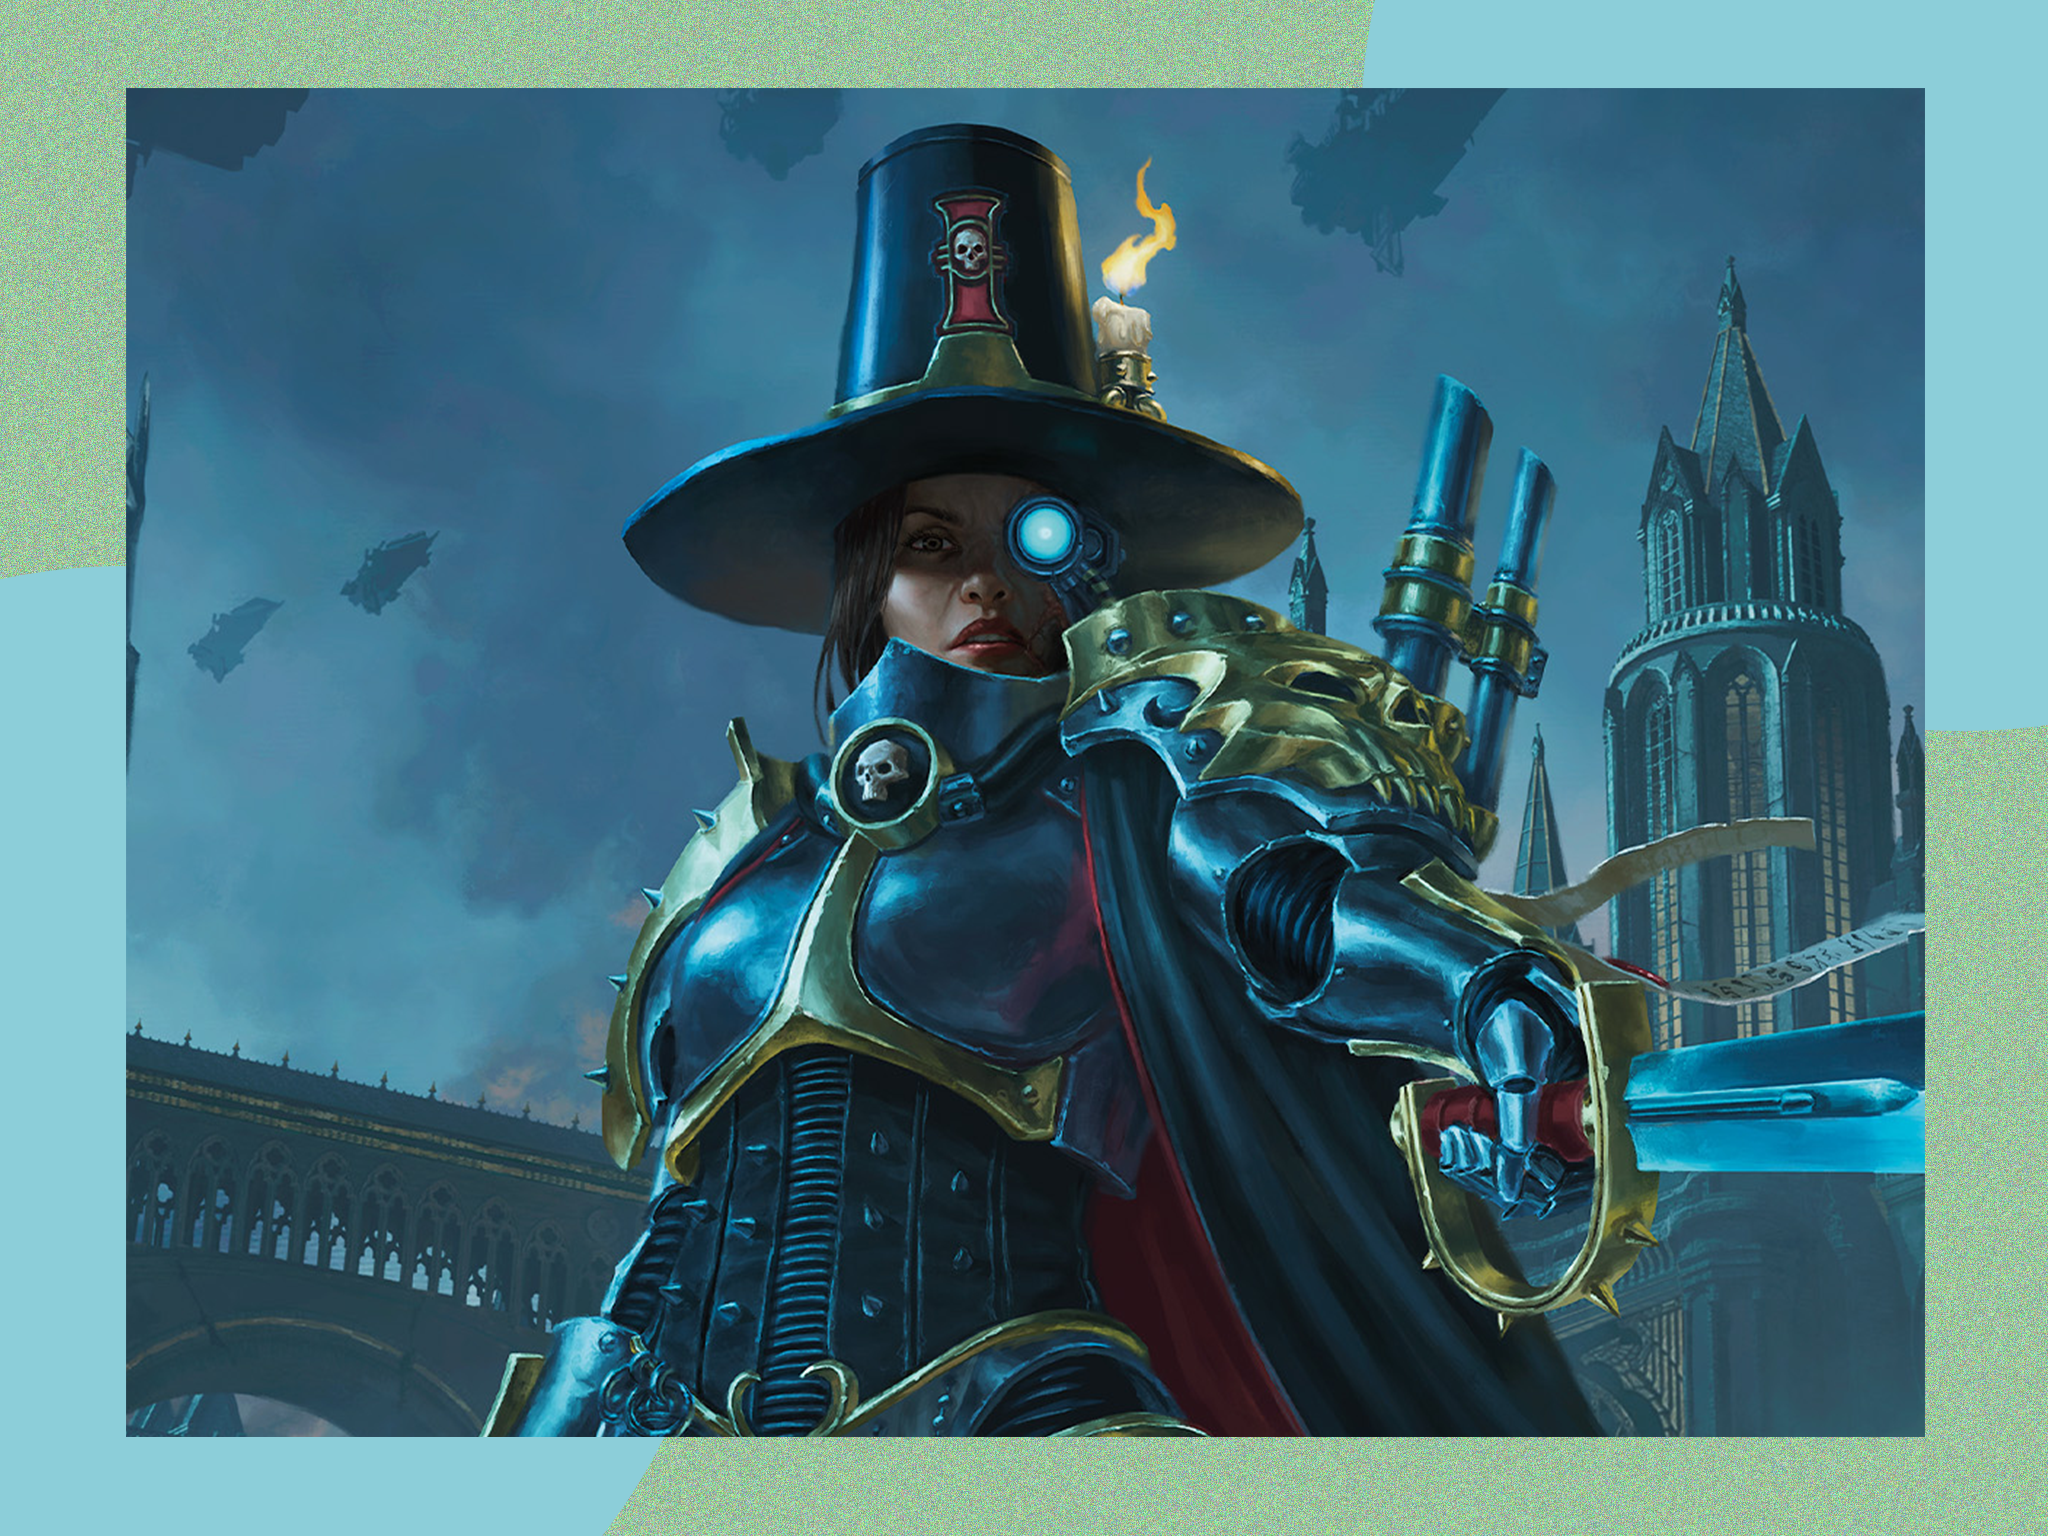 Inquisitor Grayfax is one of the legendary cards being introduced